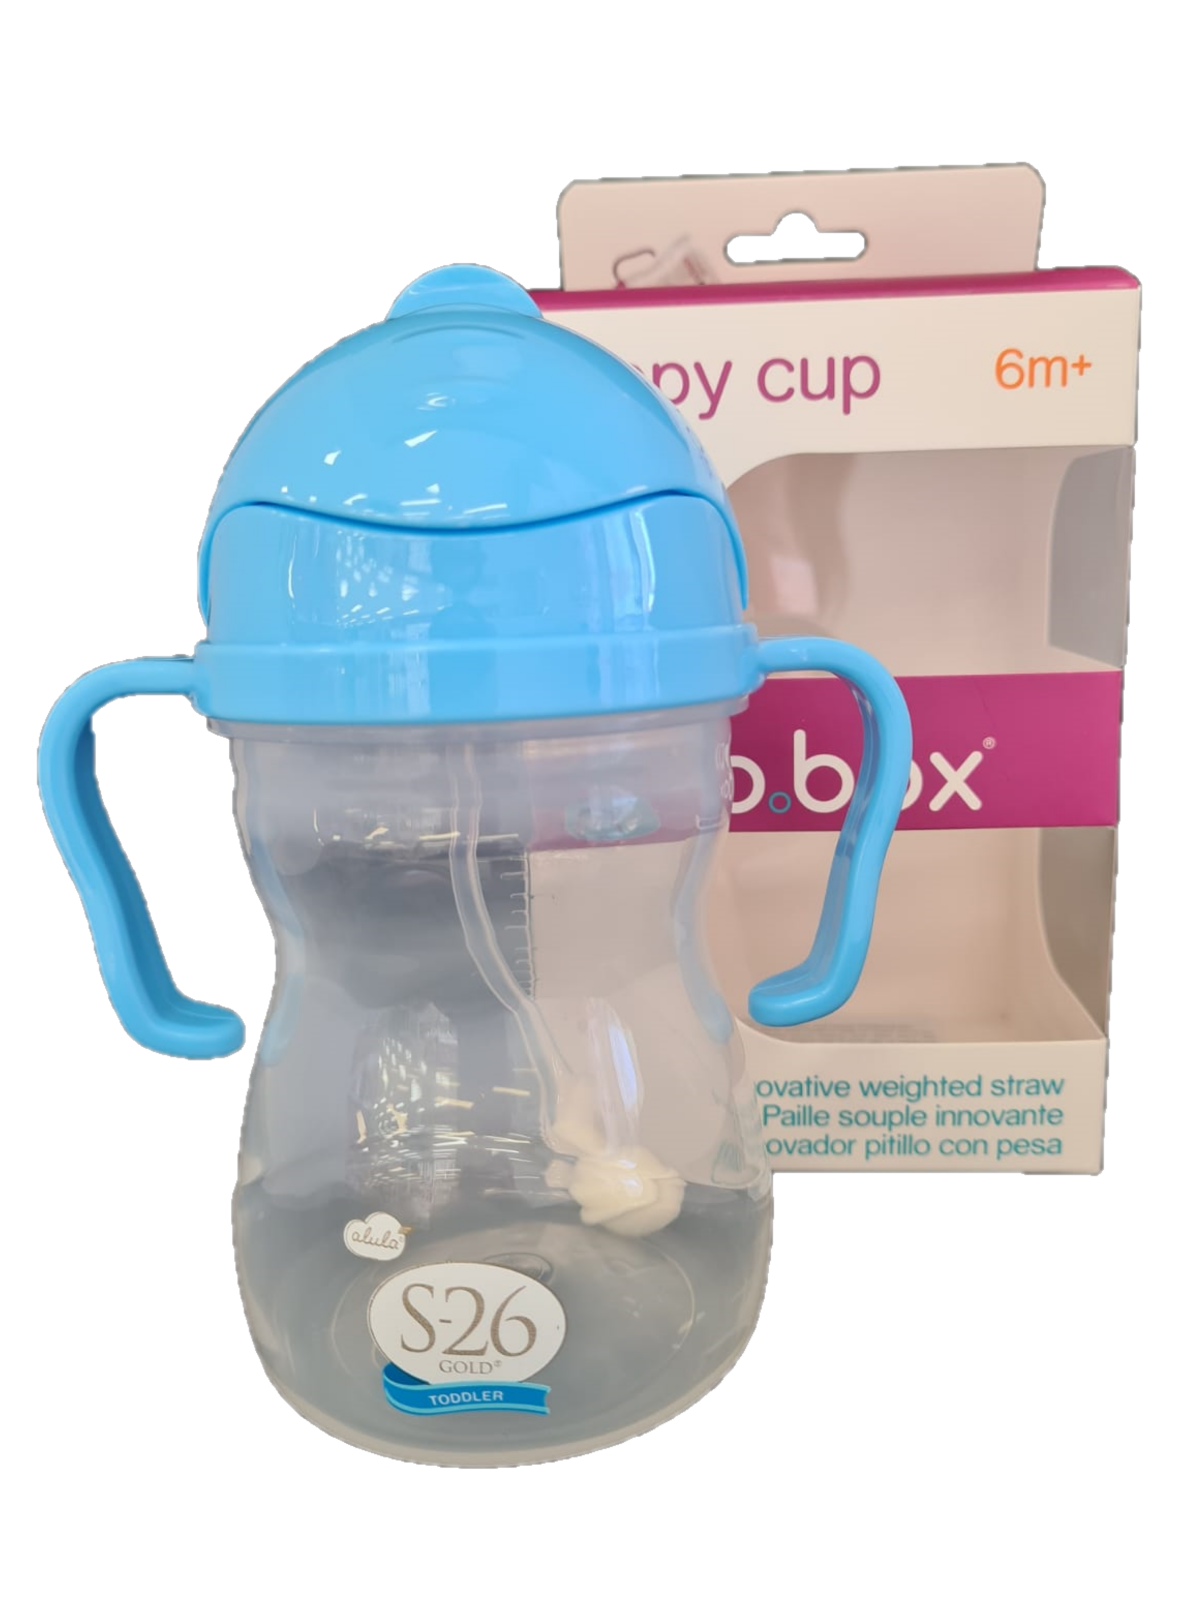 B.BOX sippy cup 6m+ - Alula S-26 GIFT